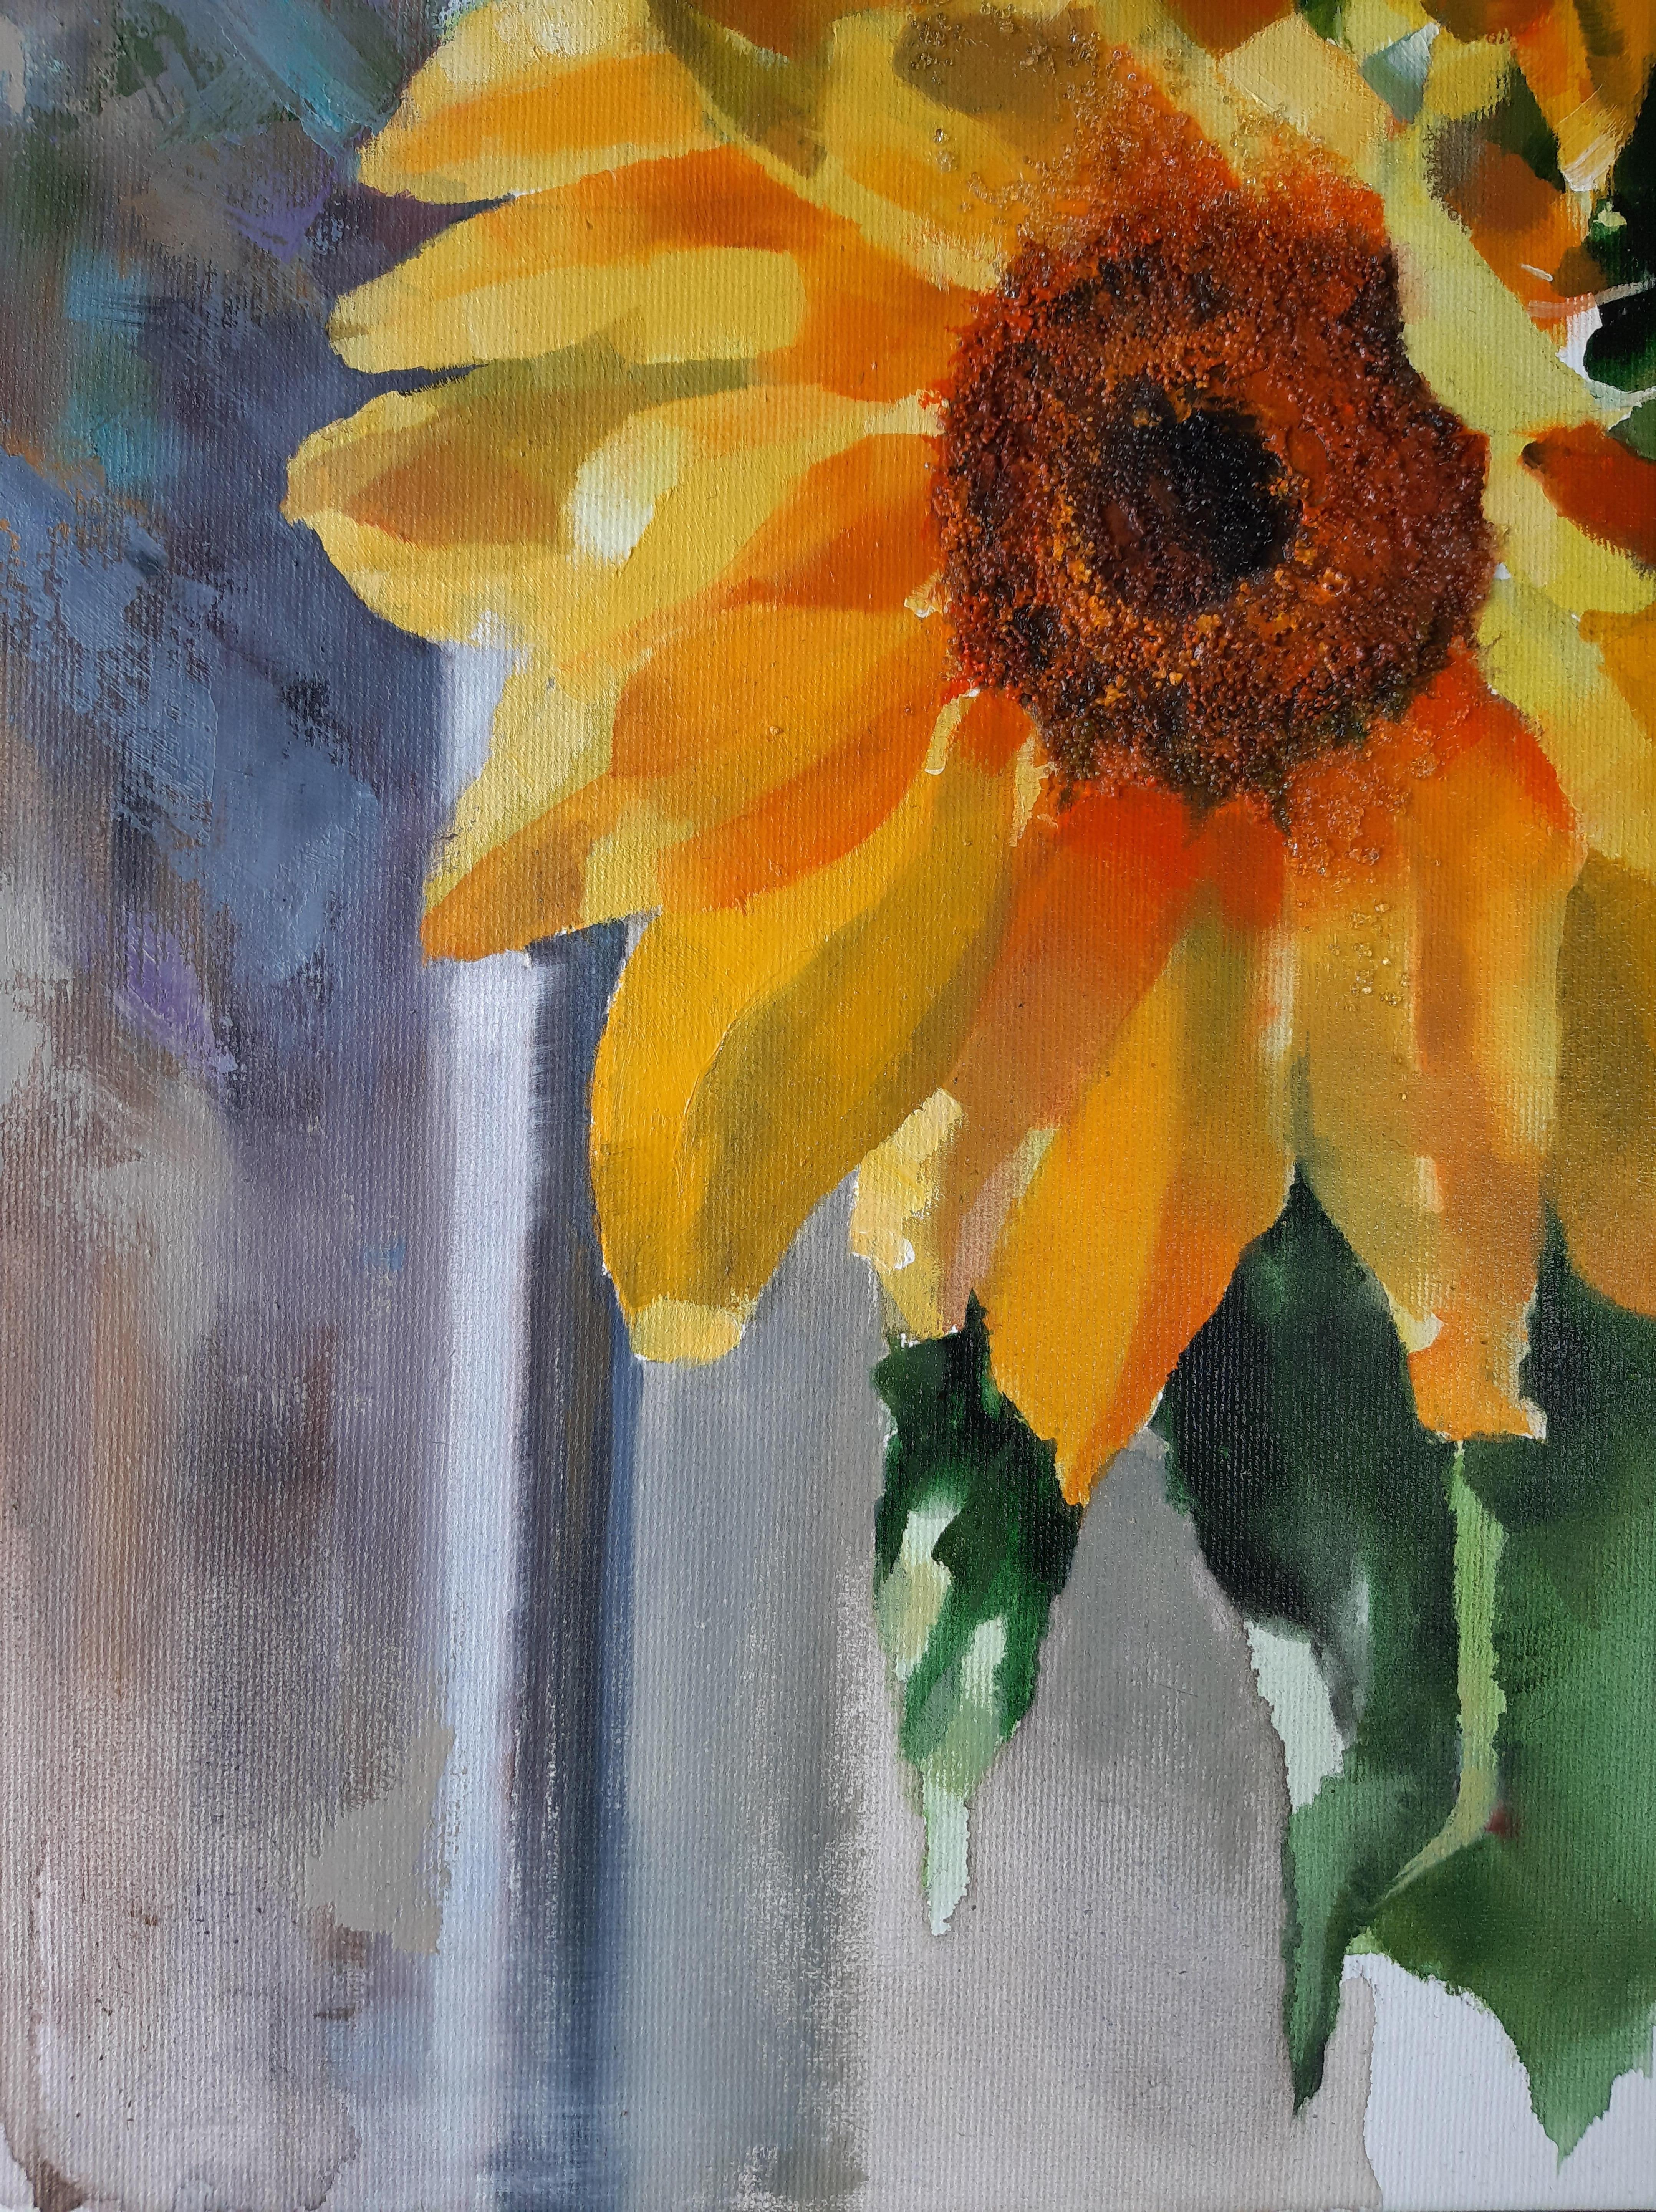 Flowers For Mom - Still Life Painting Colors Grey Yellow White Green Red Orange  en vente 2